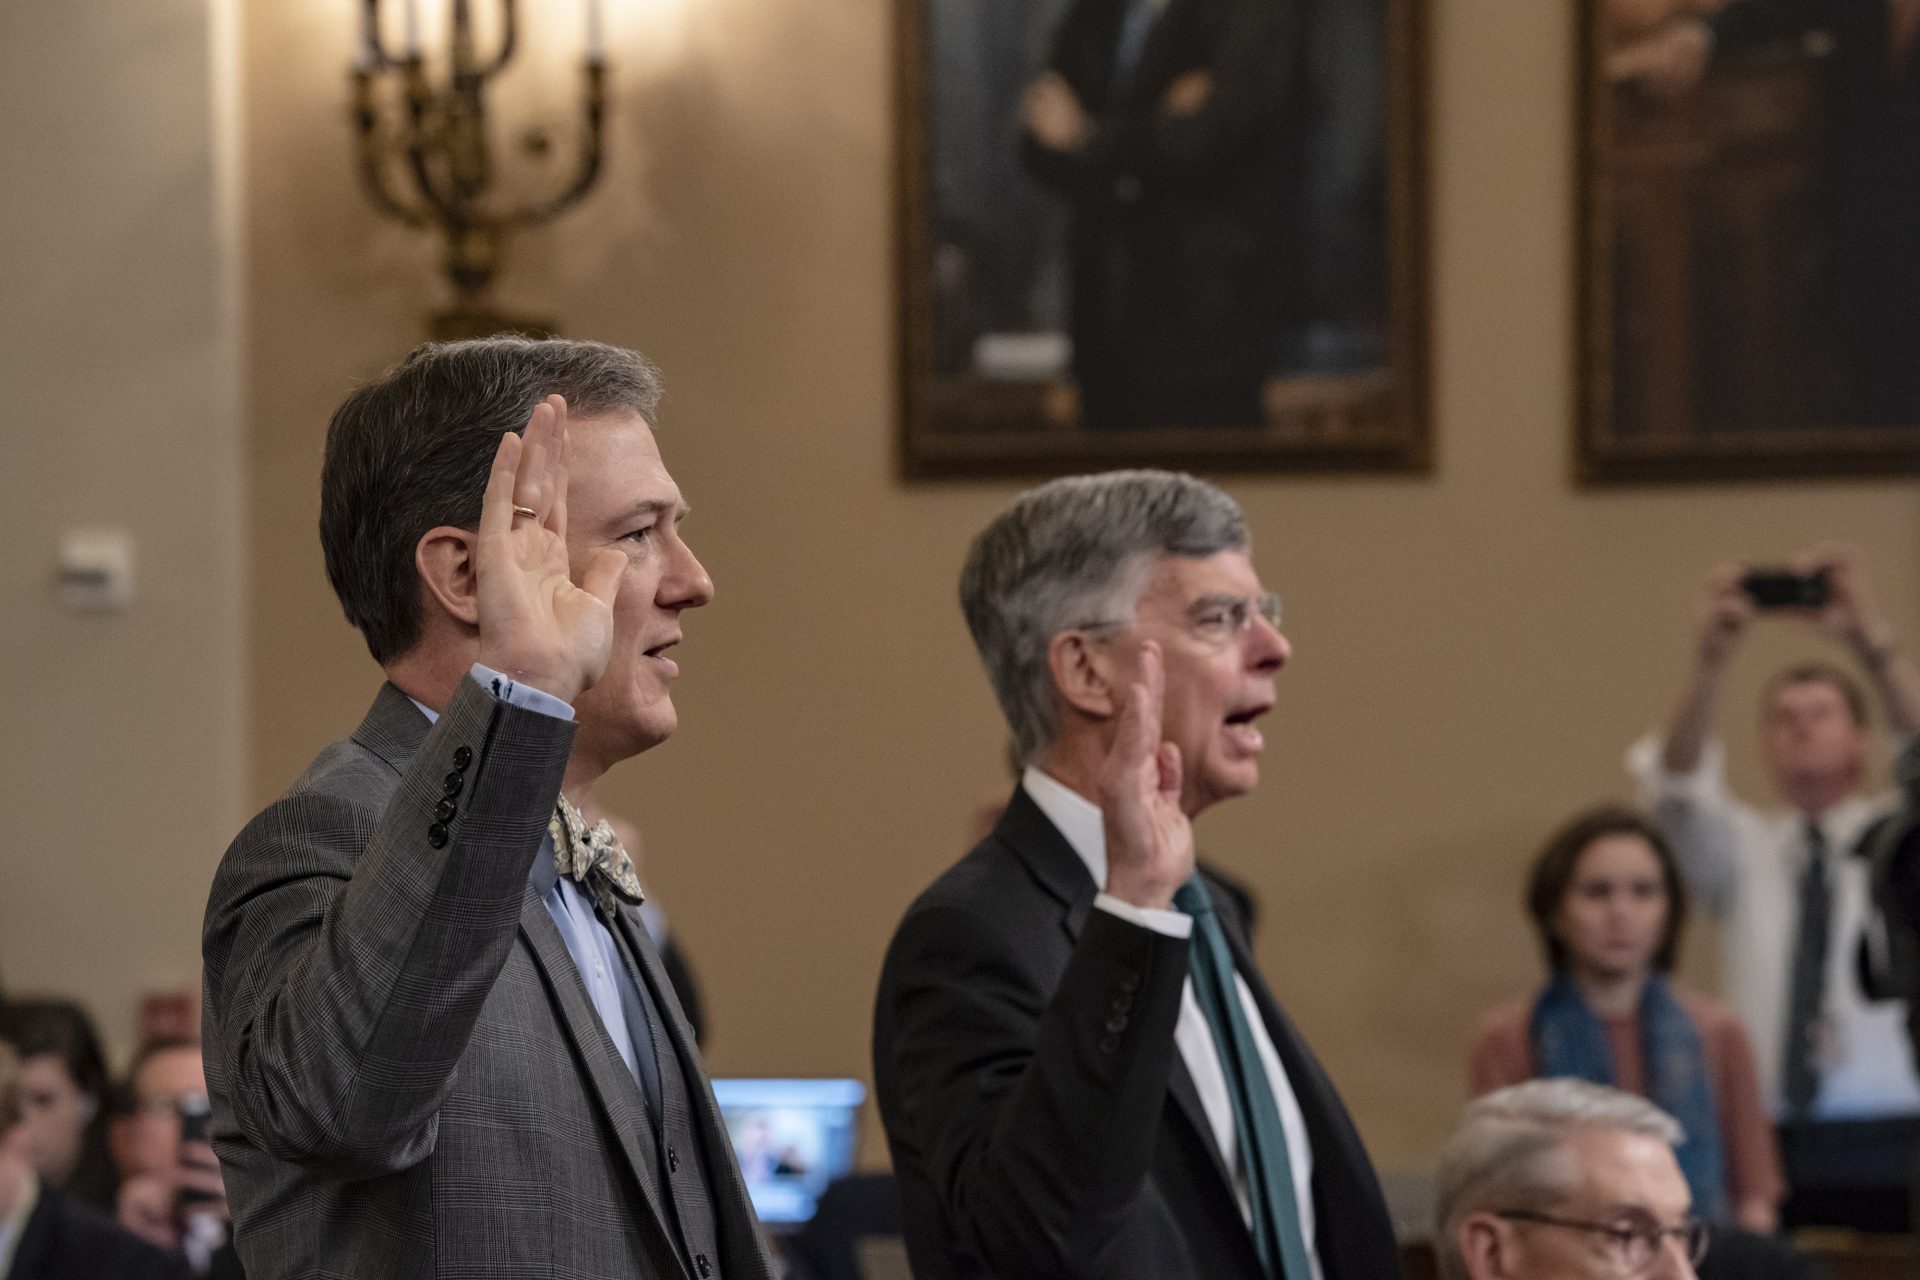 Career Foreign Service officer George Kent, left, and top U.S. diplomat in Ukraine William Taylor, right, are sworn in to testify before the House Intelligence Committee on Capitol Hill in Washington, Wednesday, Nov. 13, 2019, during the first public impeachment hearings on President Donald Trump's efforts to tie U.S. aid for Ukraine to investigations of his political opponents.